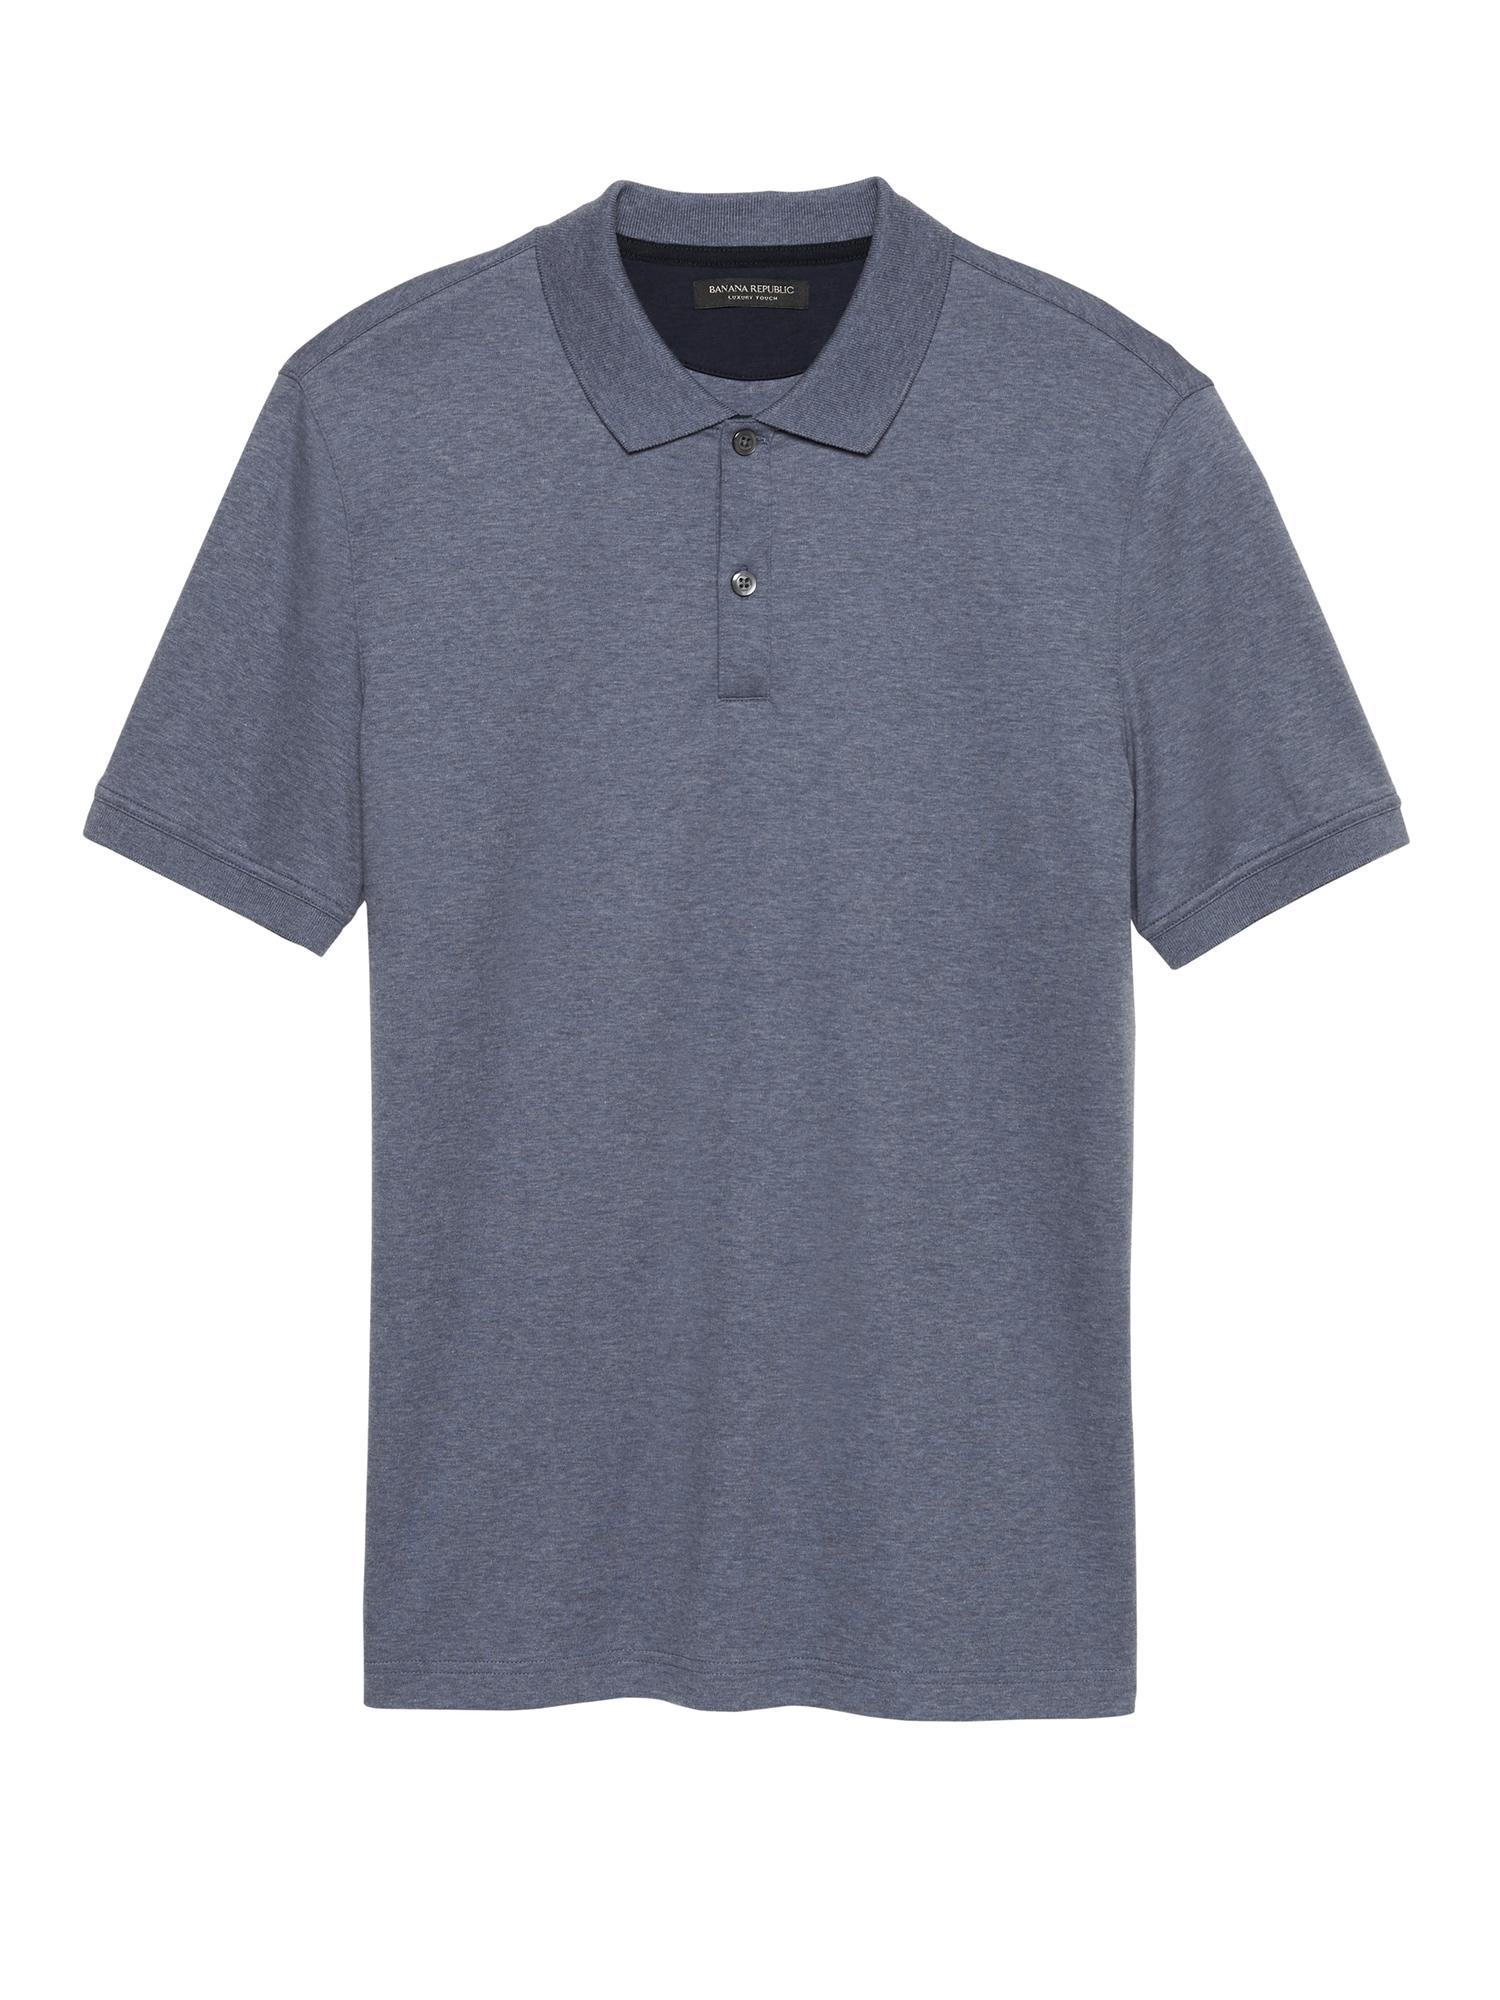 Banana Republic Slim Luxury-touch Polo Shirt in Blue for Men - Lyst